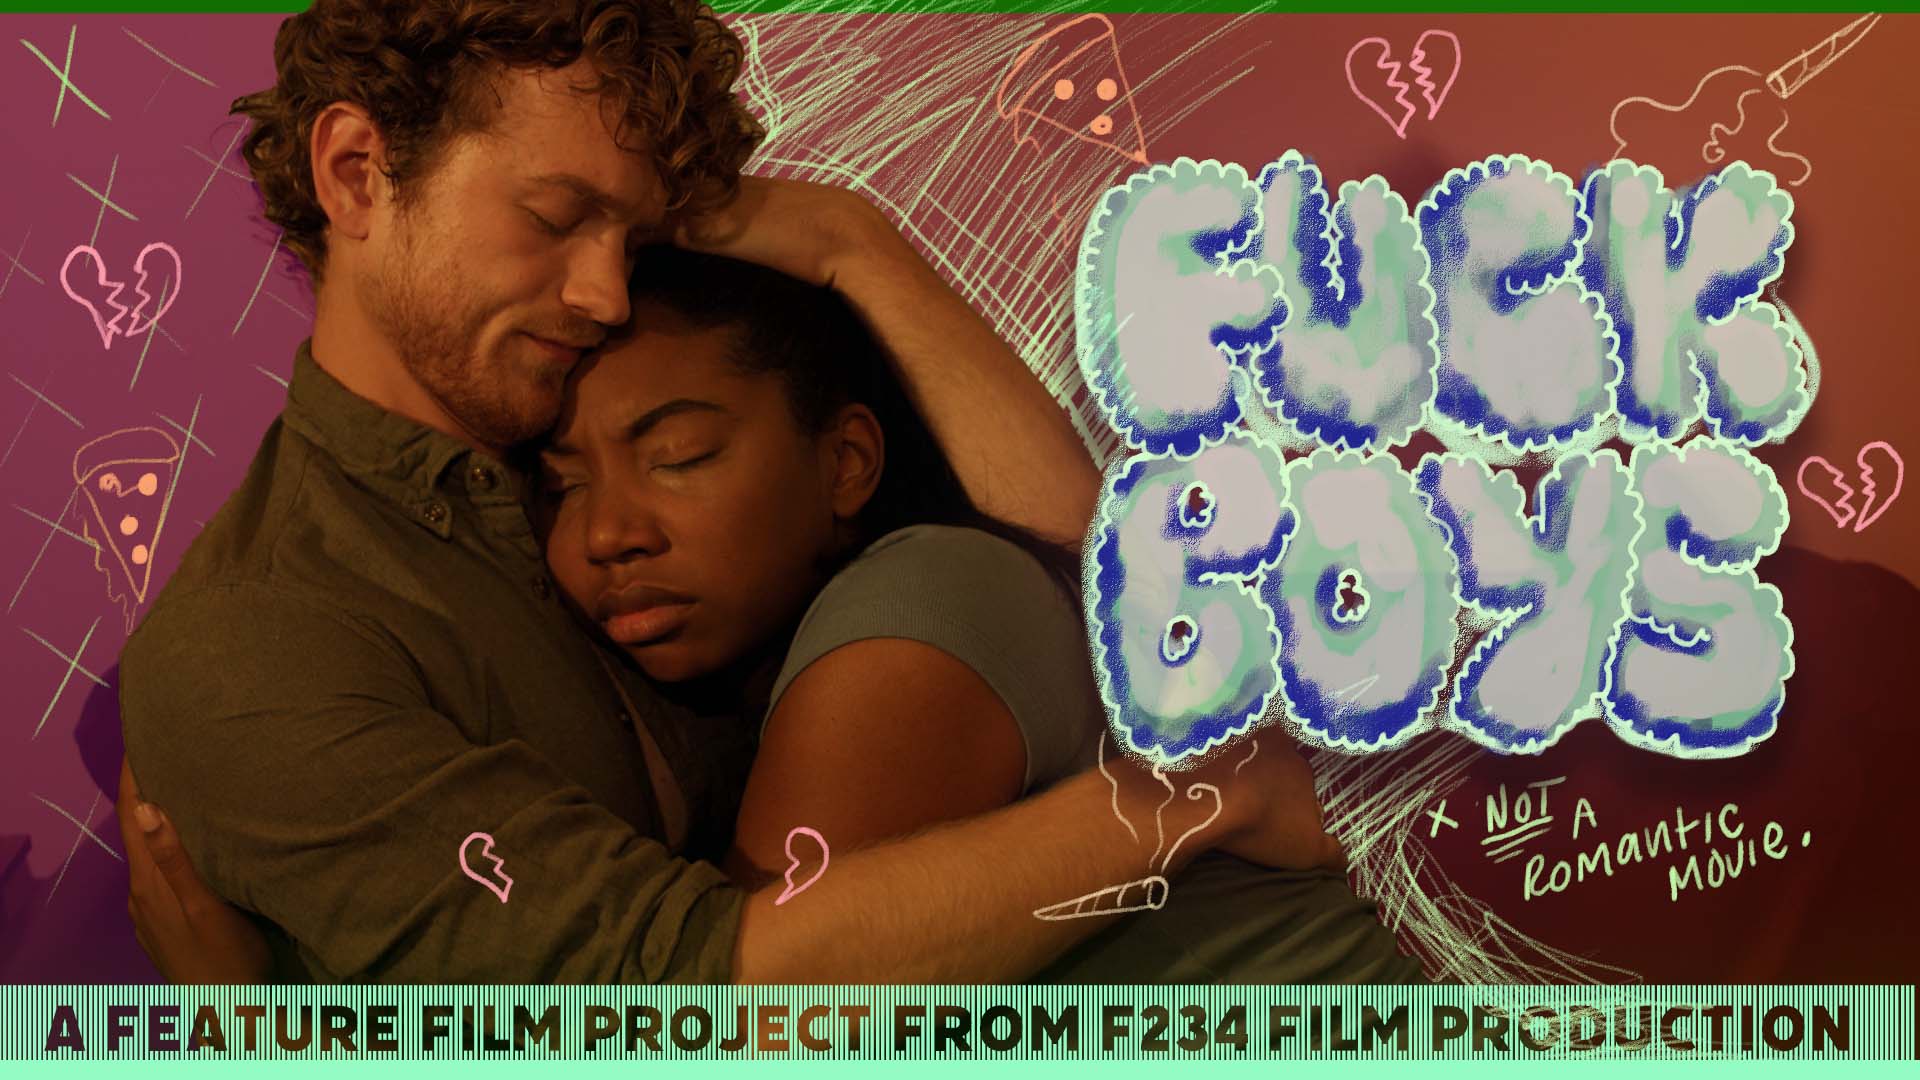 Elizabth baker and Joah Krol star in Fuck boys not a romantic movie feature film project from f234 film production